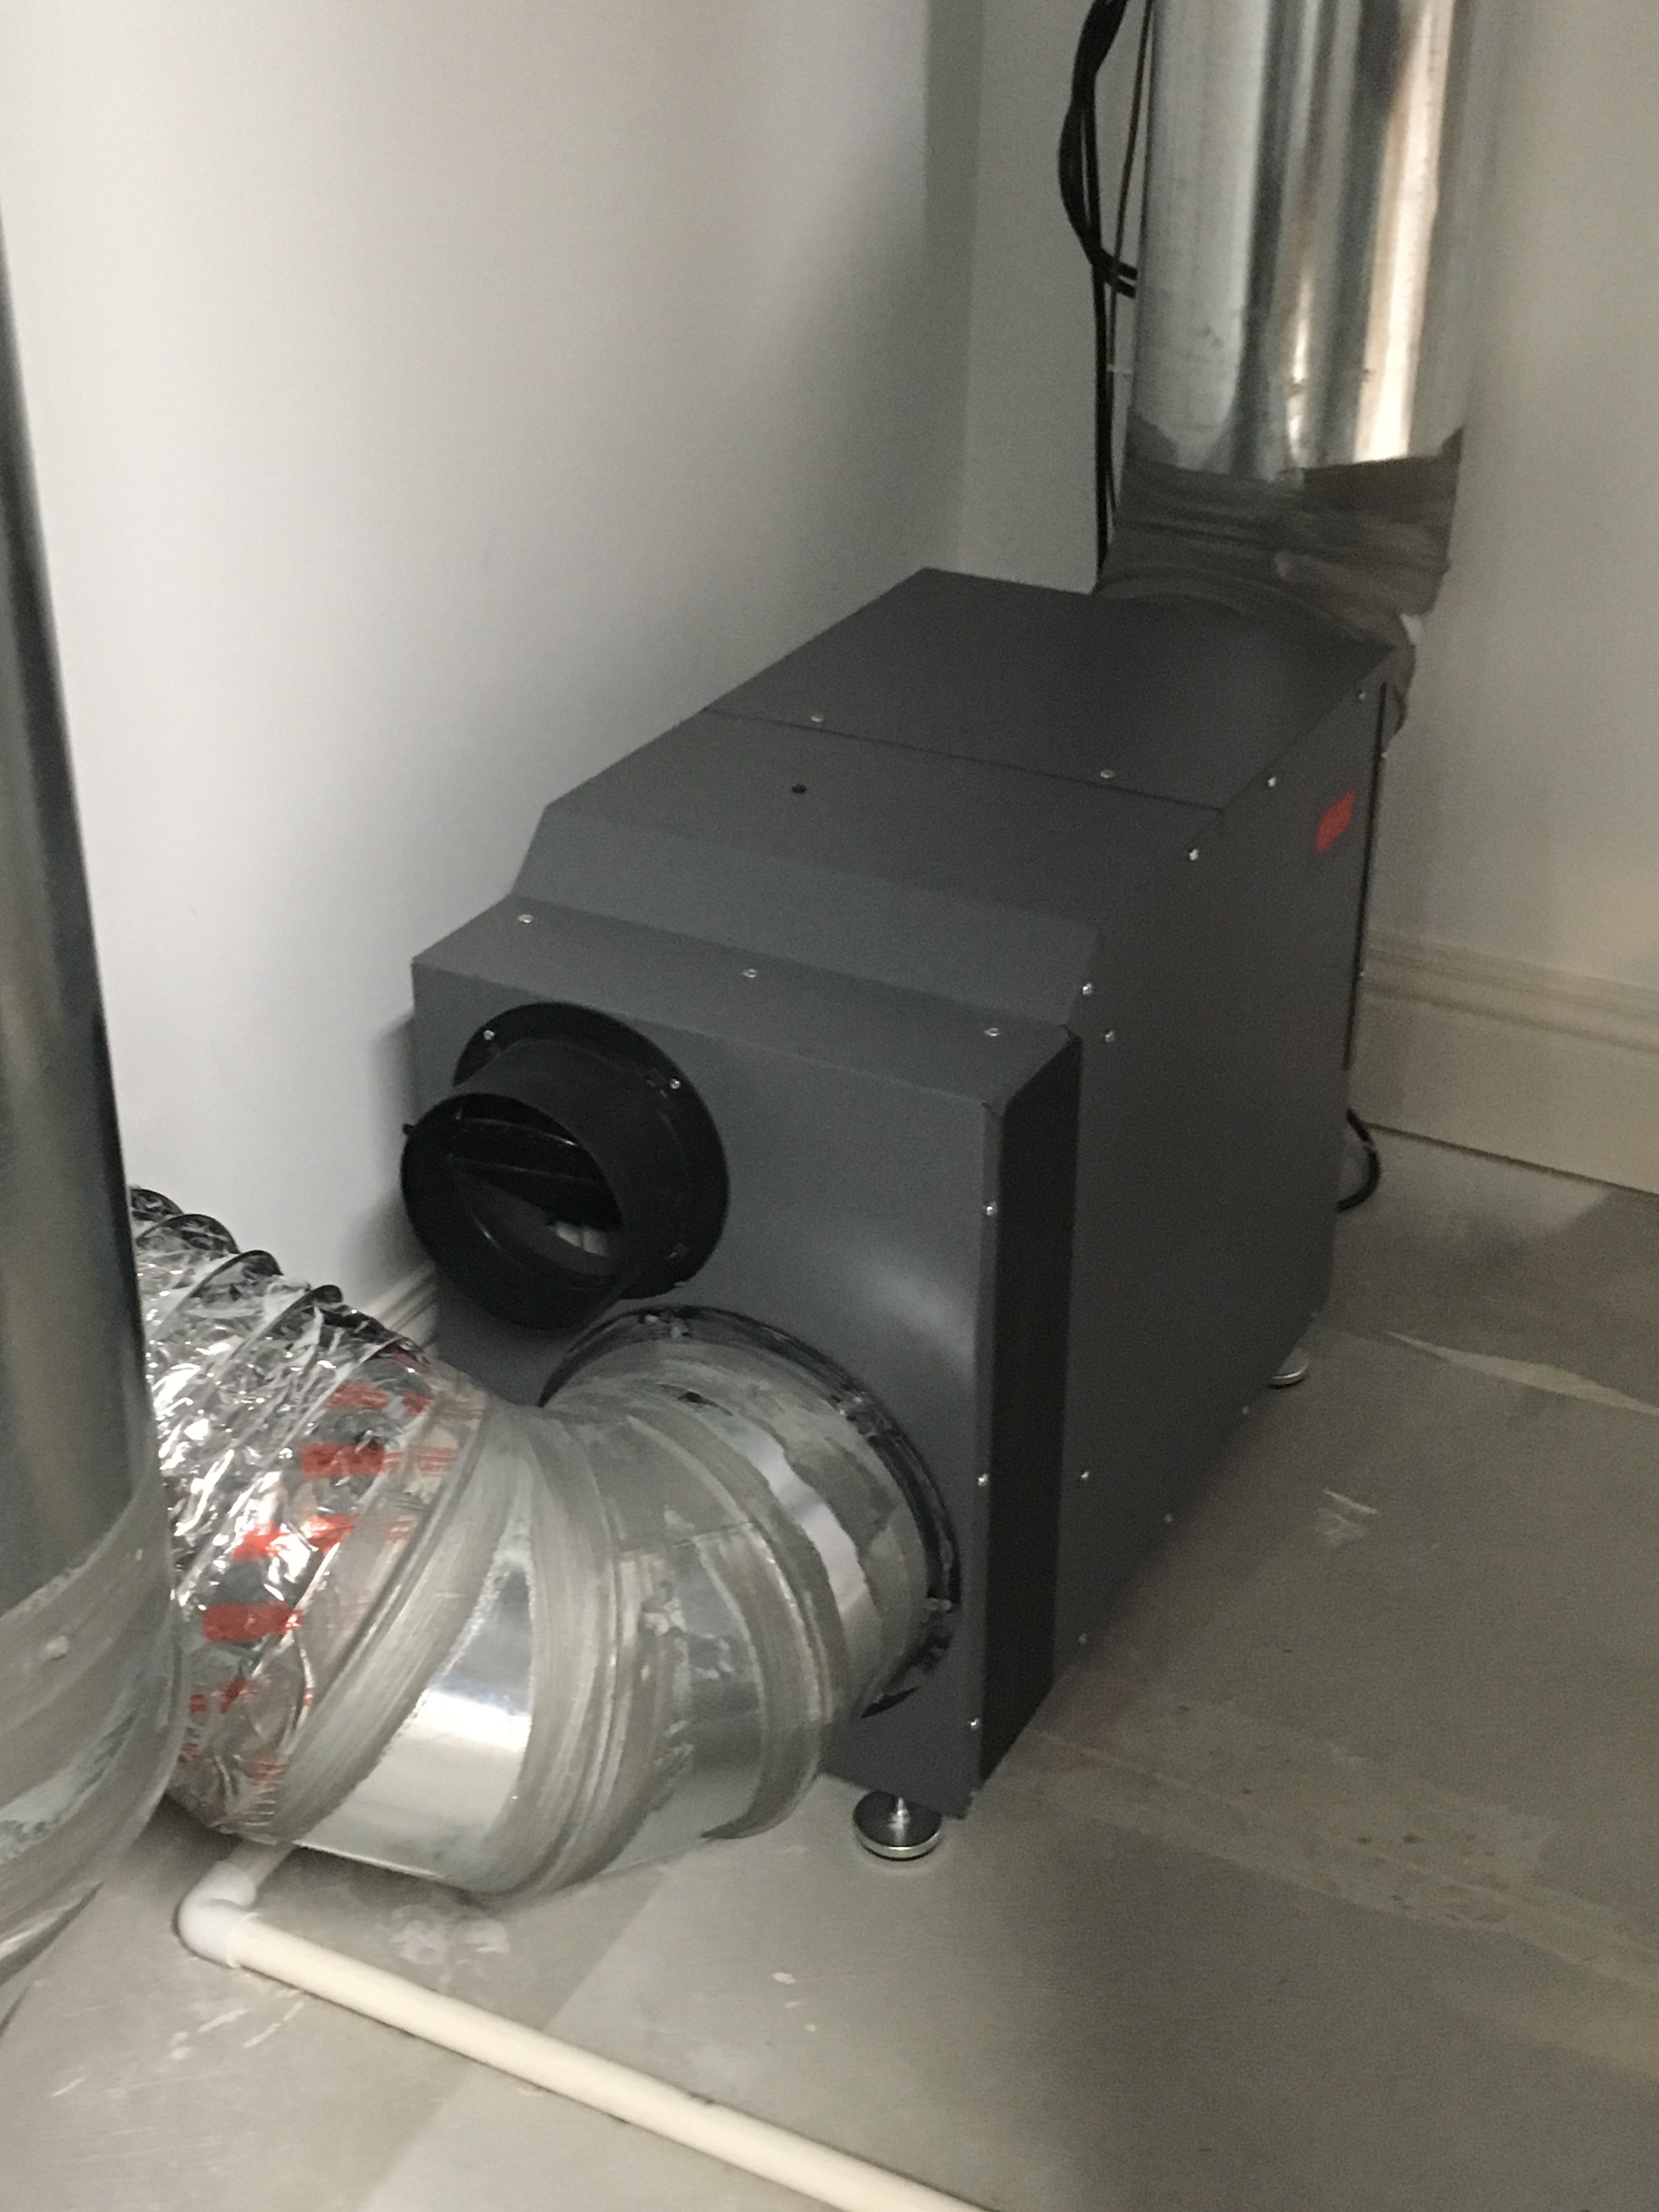 A whole-house dehumidifier is connected to the return side of the HVAC